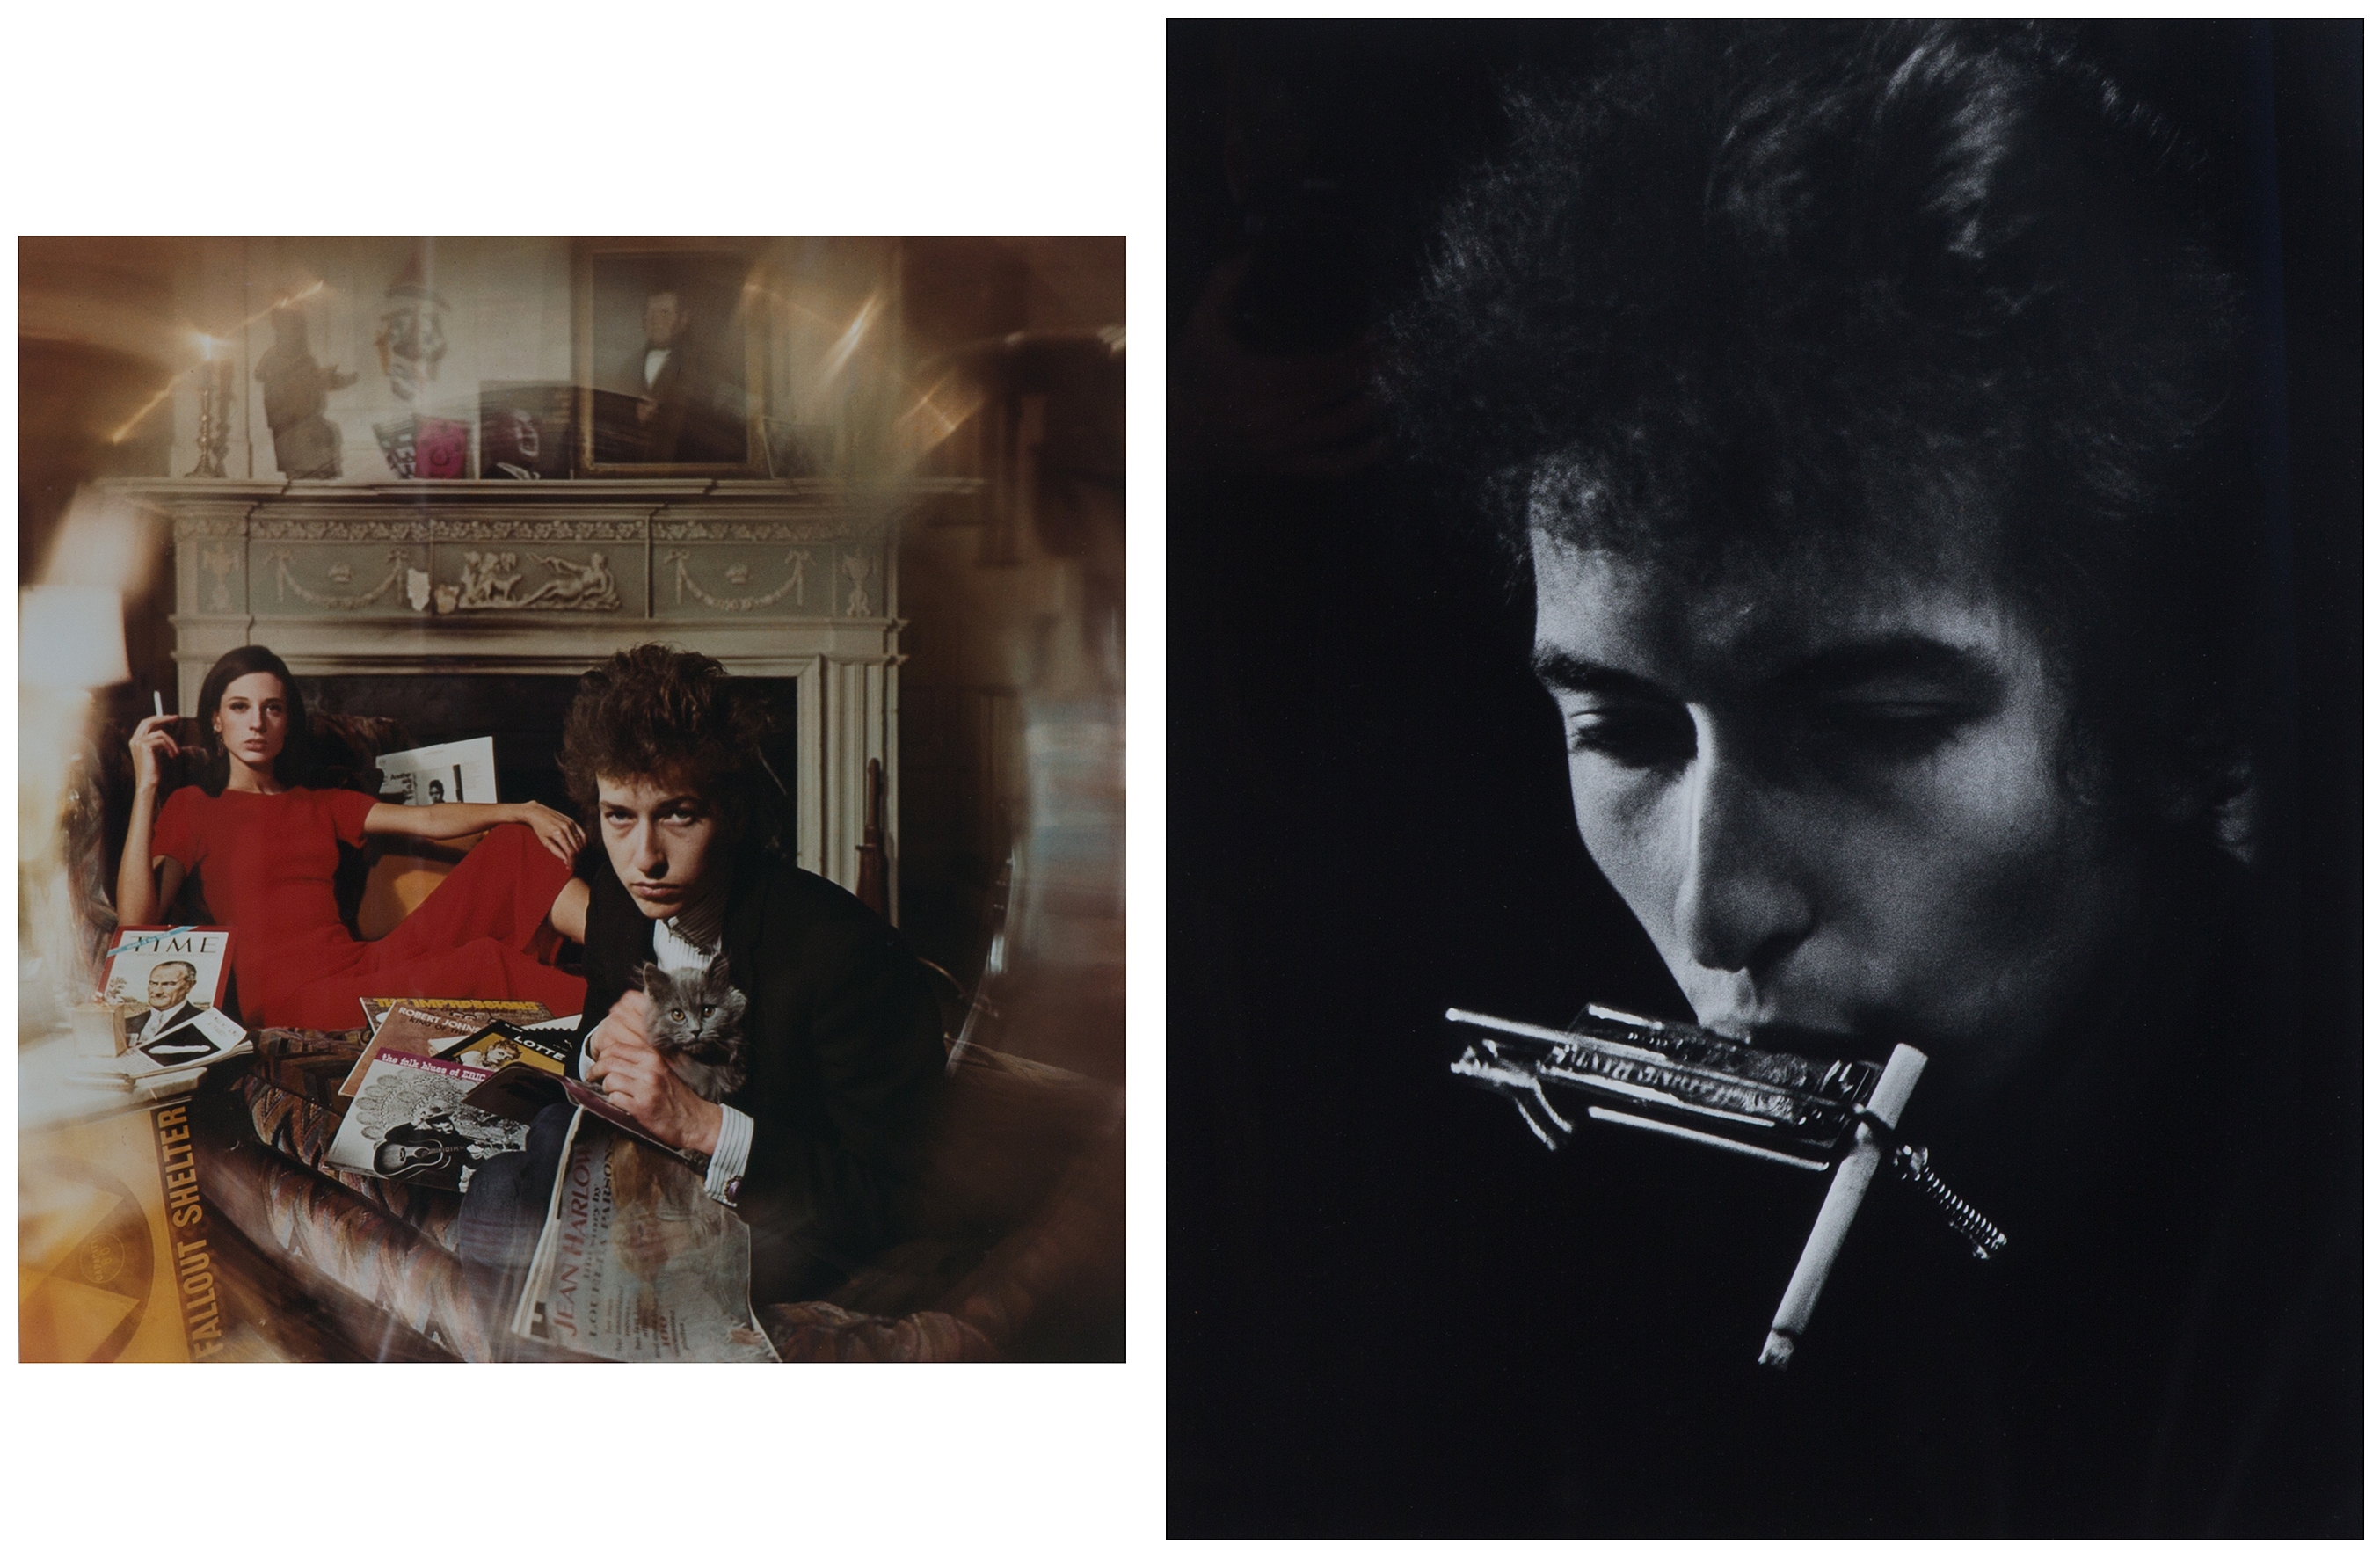 Sally Grossman, Immortalized on a Dylan Album Cover, Dies at 81